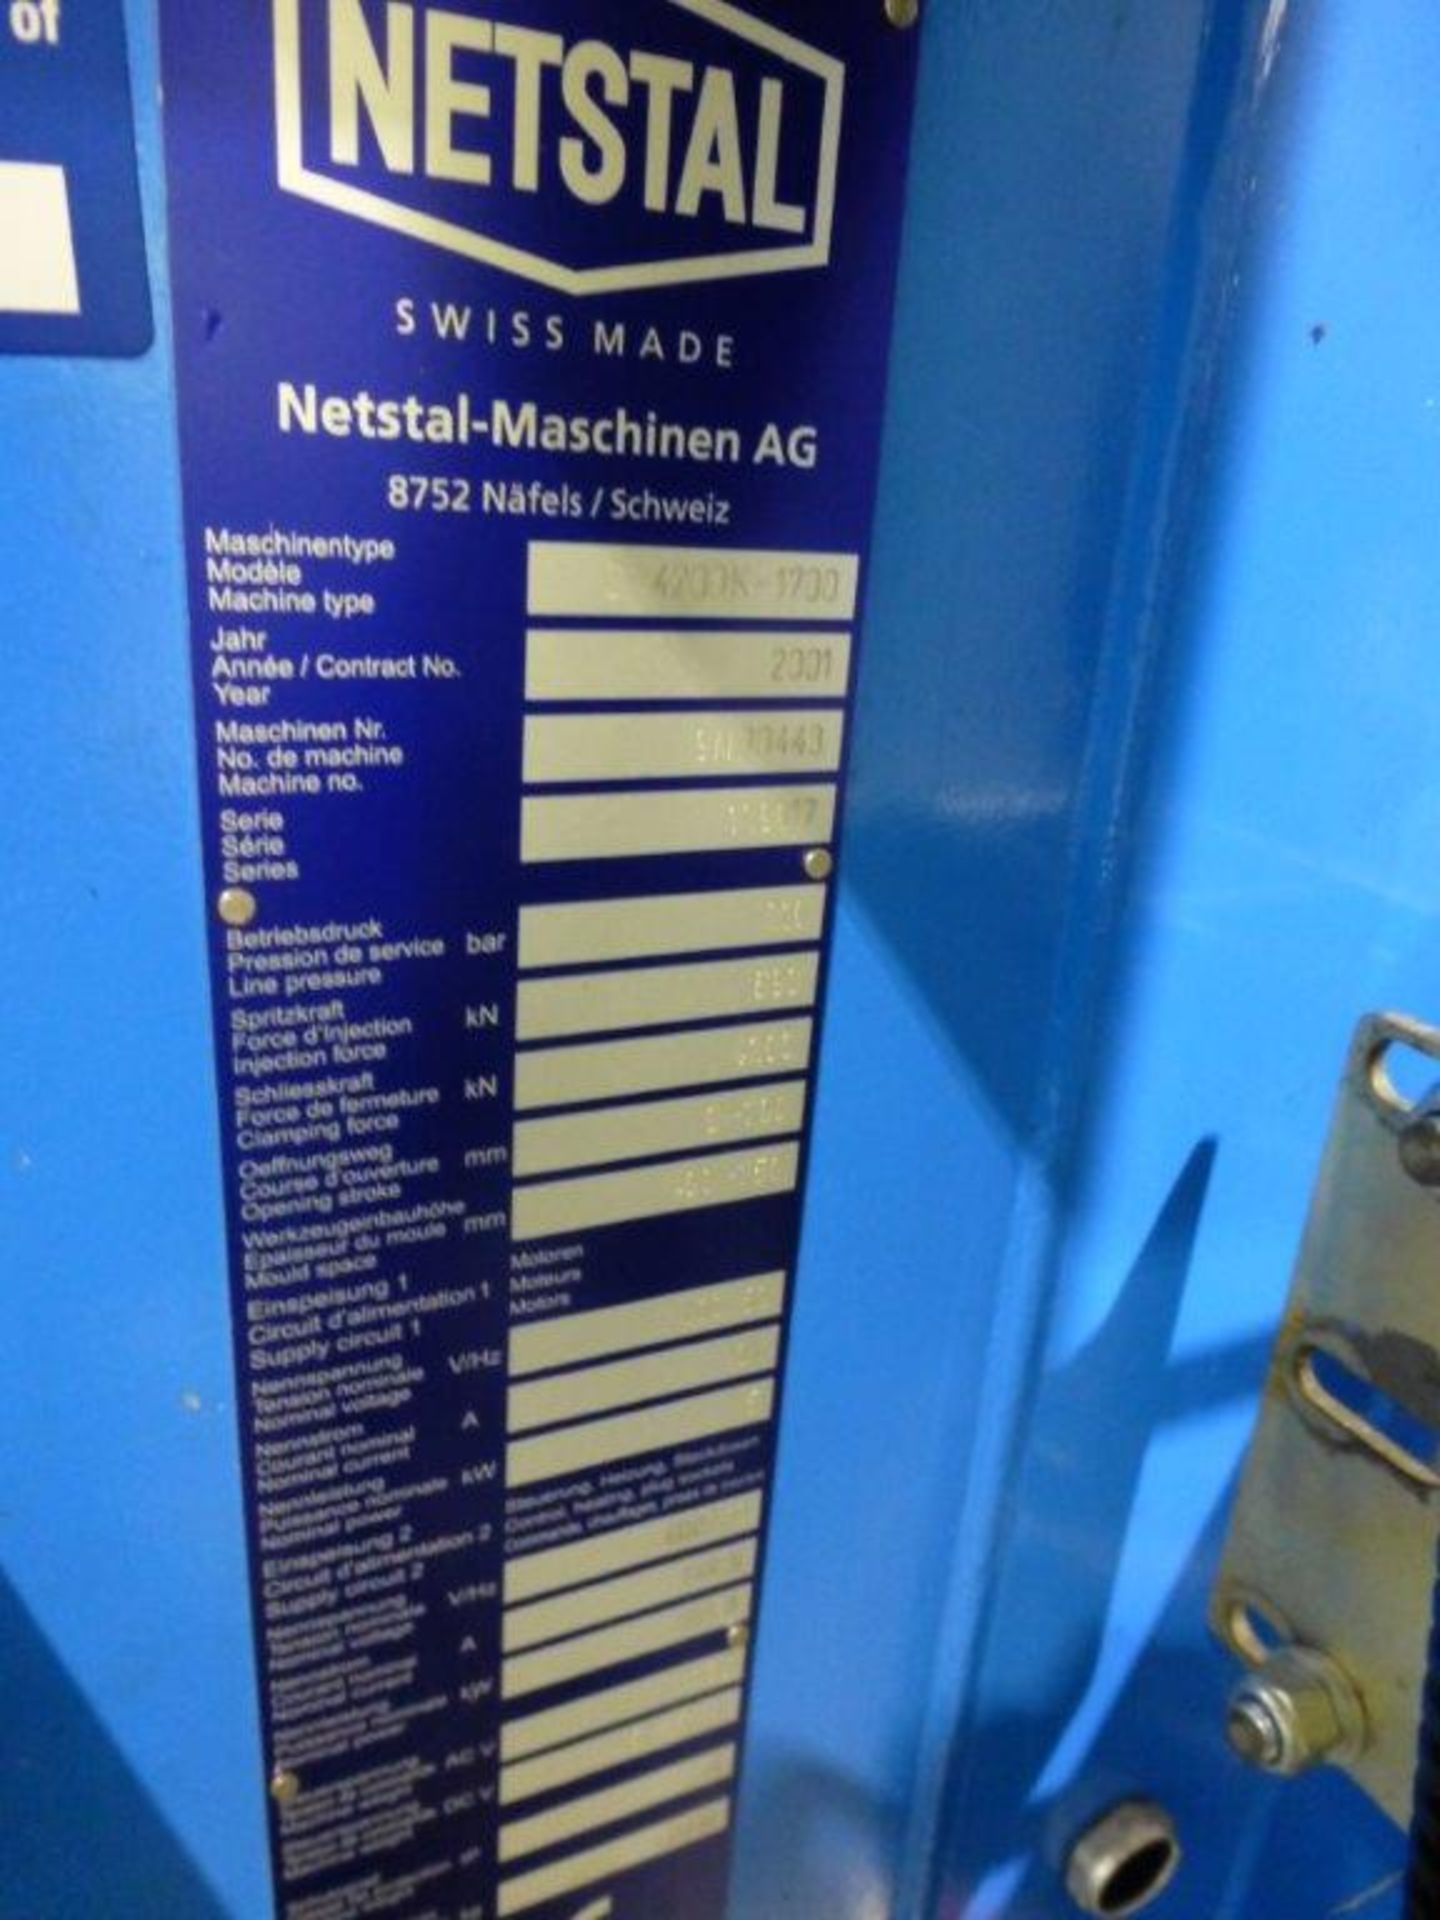 Netstal Synergy S-4200K-1700 CNC Plastic Injection Moulding Machine Serial No. 9N.10443 (2001) - Image 7 of 8